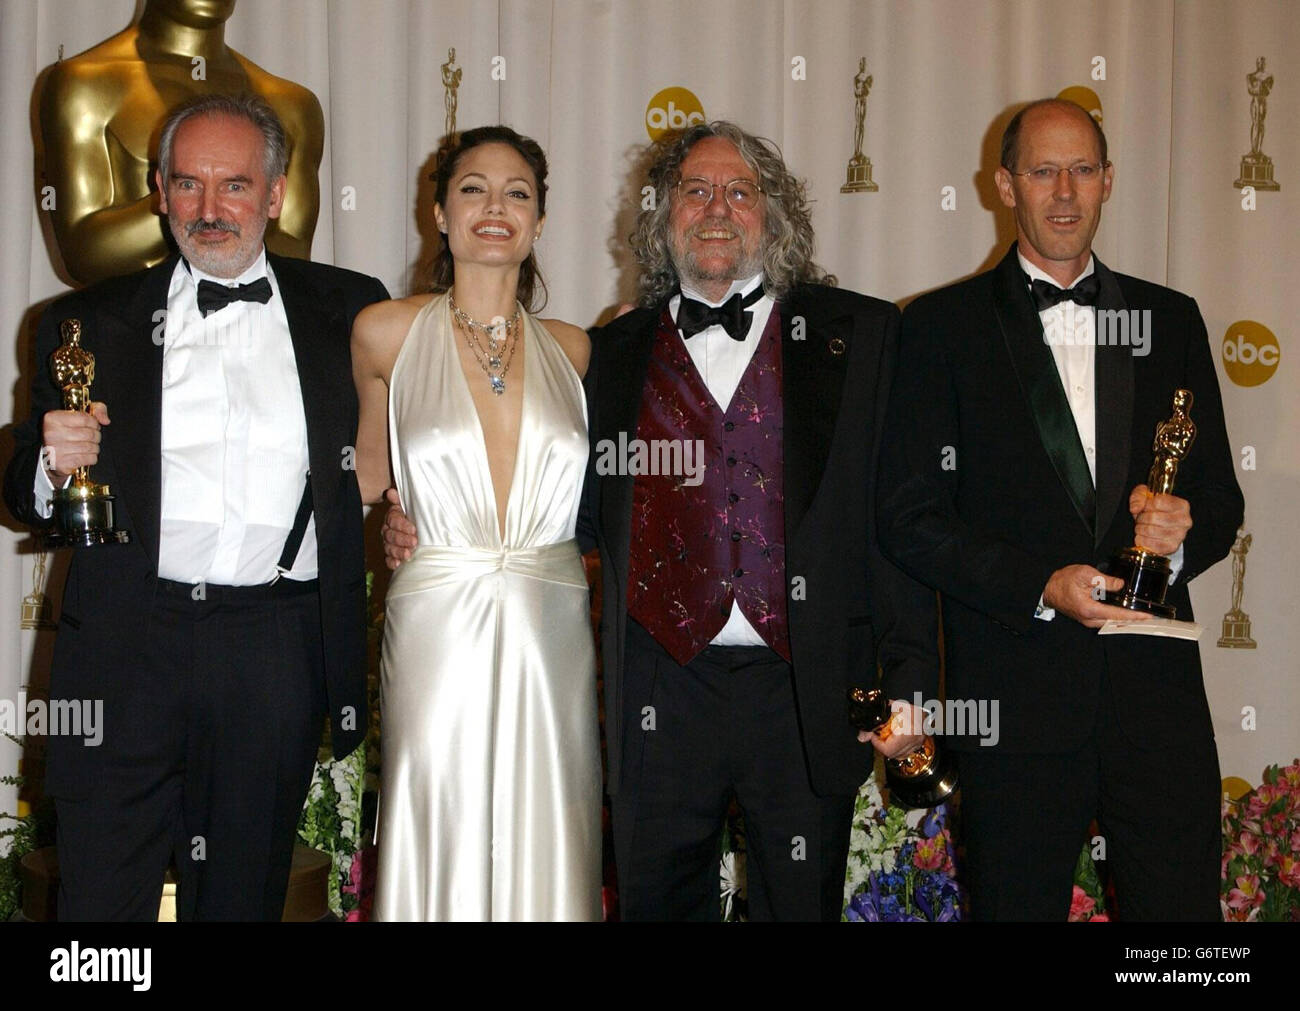 Dan Hennah, Grant Major and Alan Lee with their Oscars for Art Direction, for Lord of the Rings: The Return of the King and actress Angelina Jolie at the Kodak Theatre in Los Angeles during the 76th Academy Awards. Angelina Jolie is wearing a H Stern diamond necklace, worth 1m. Stock Photo